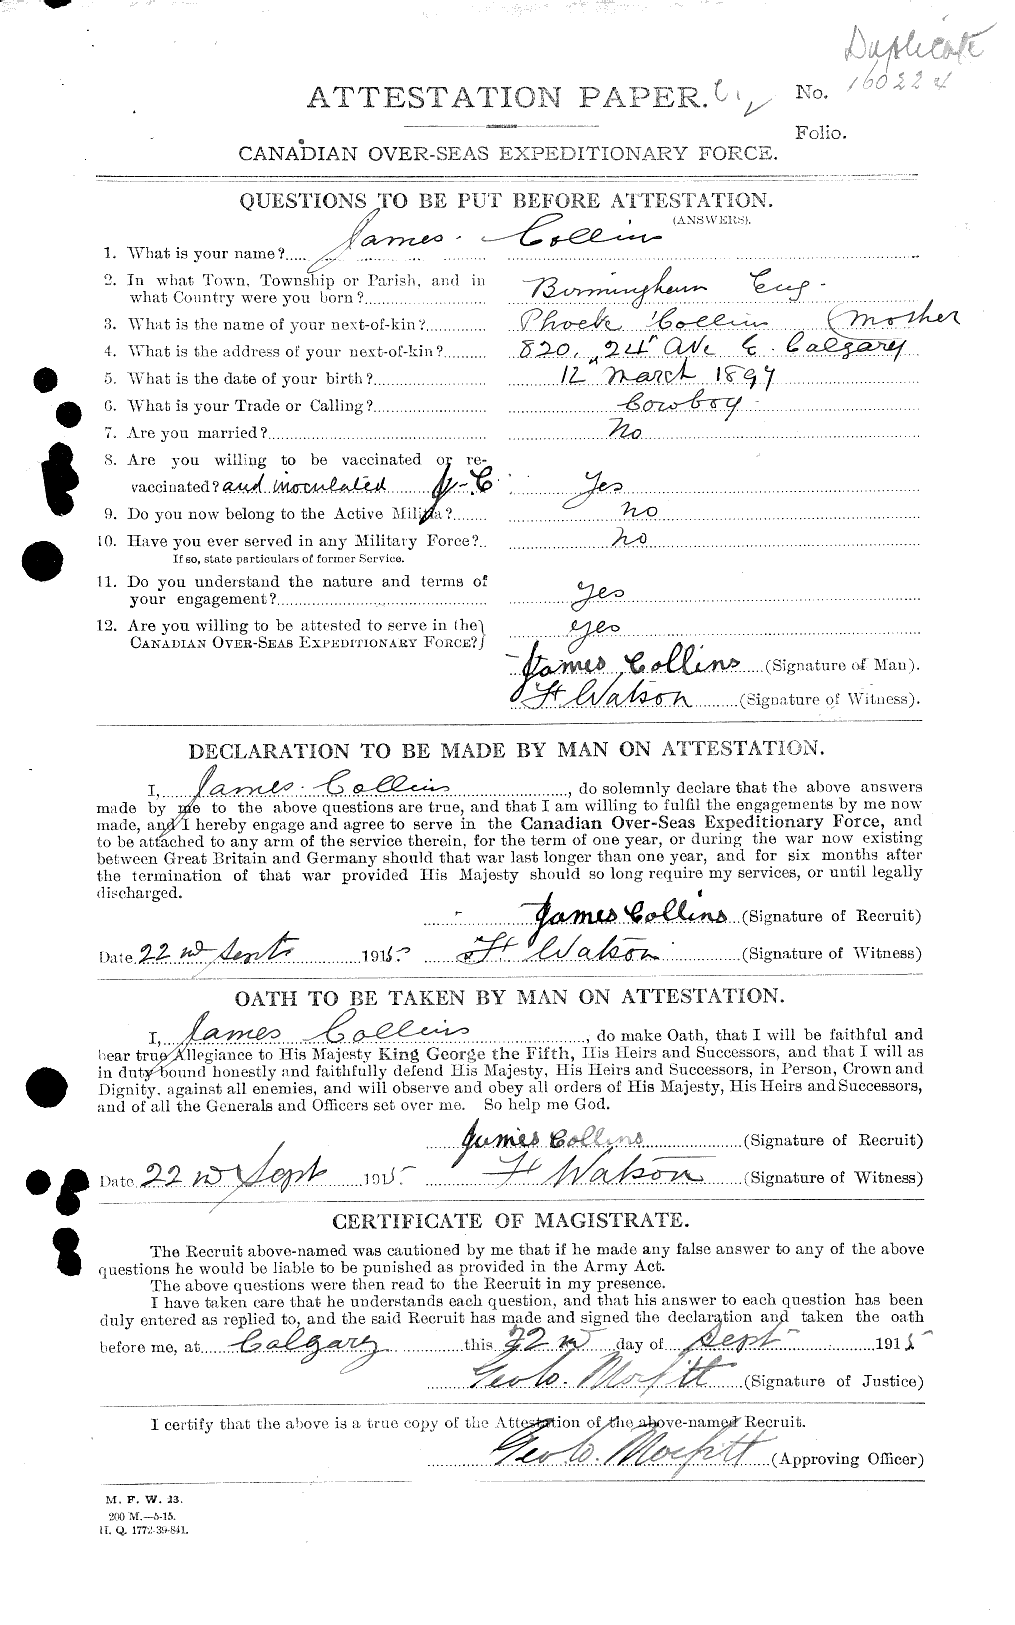 Personnel Records of the First World War - CEF 037906a